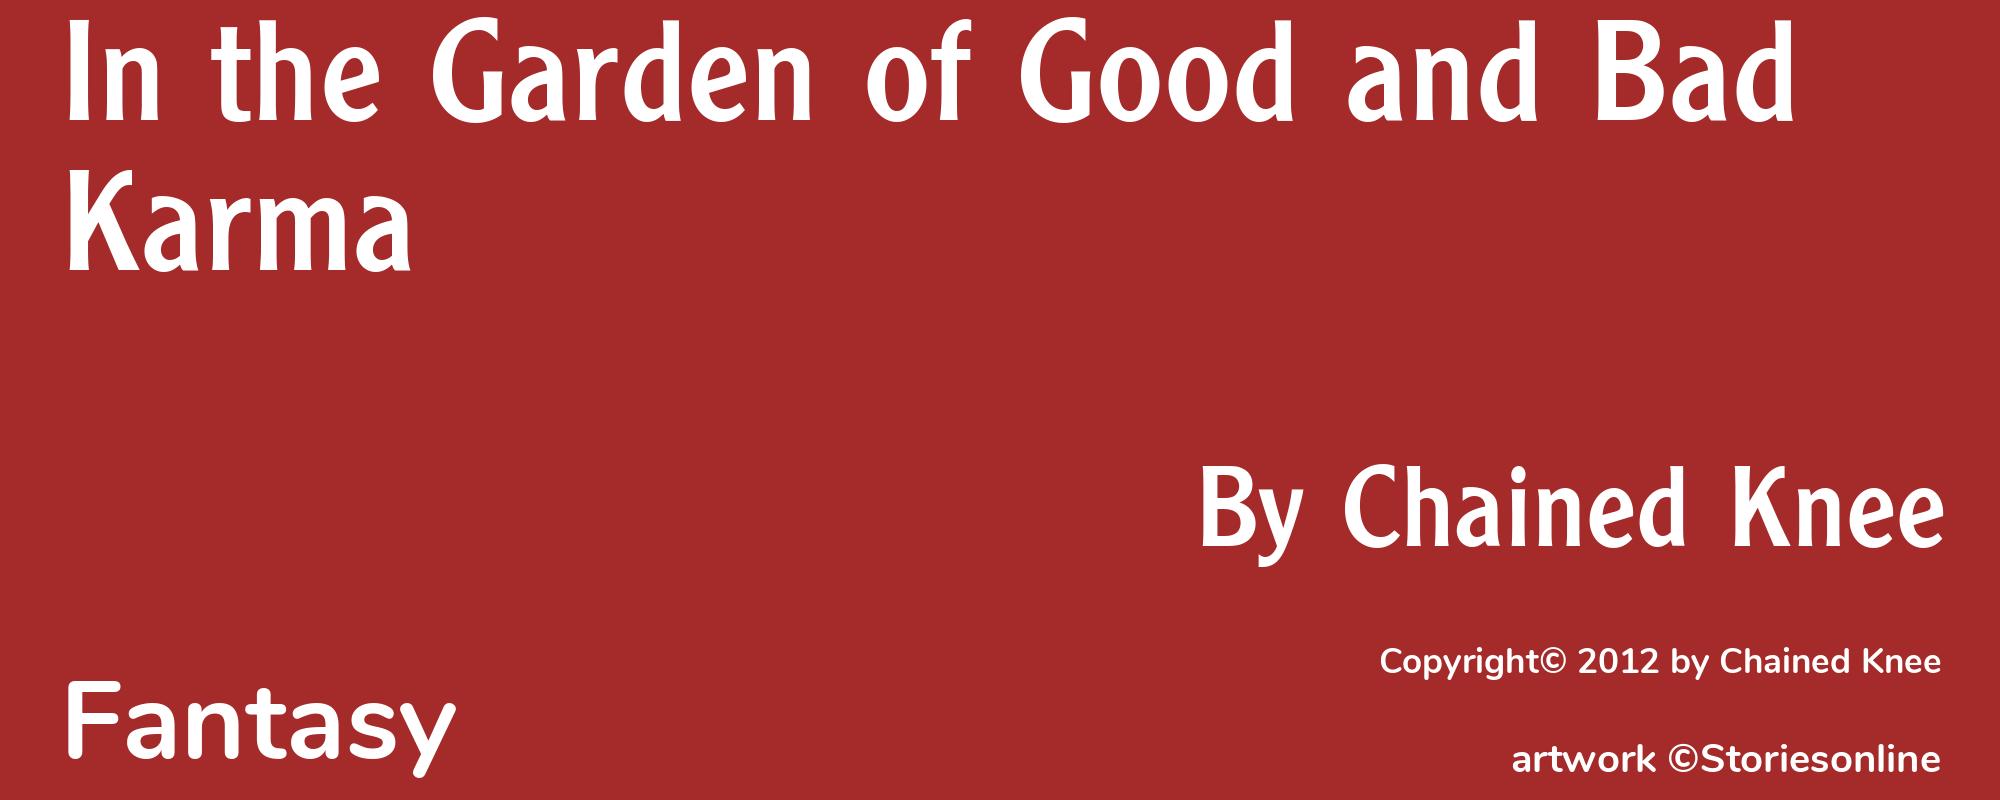 In the Garden of Good and Bad Karma - Cover